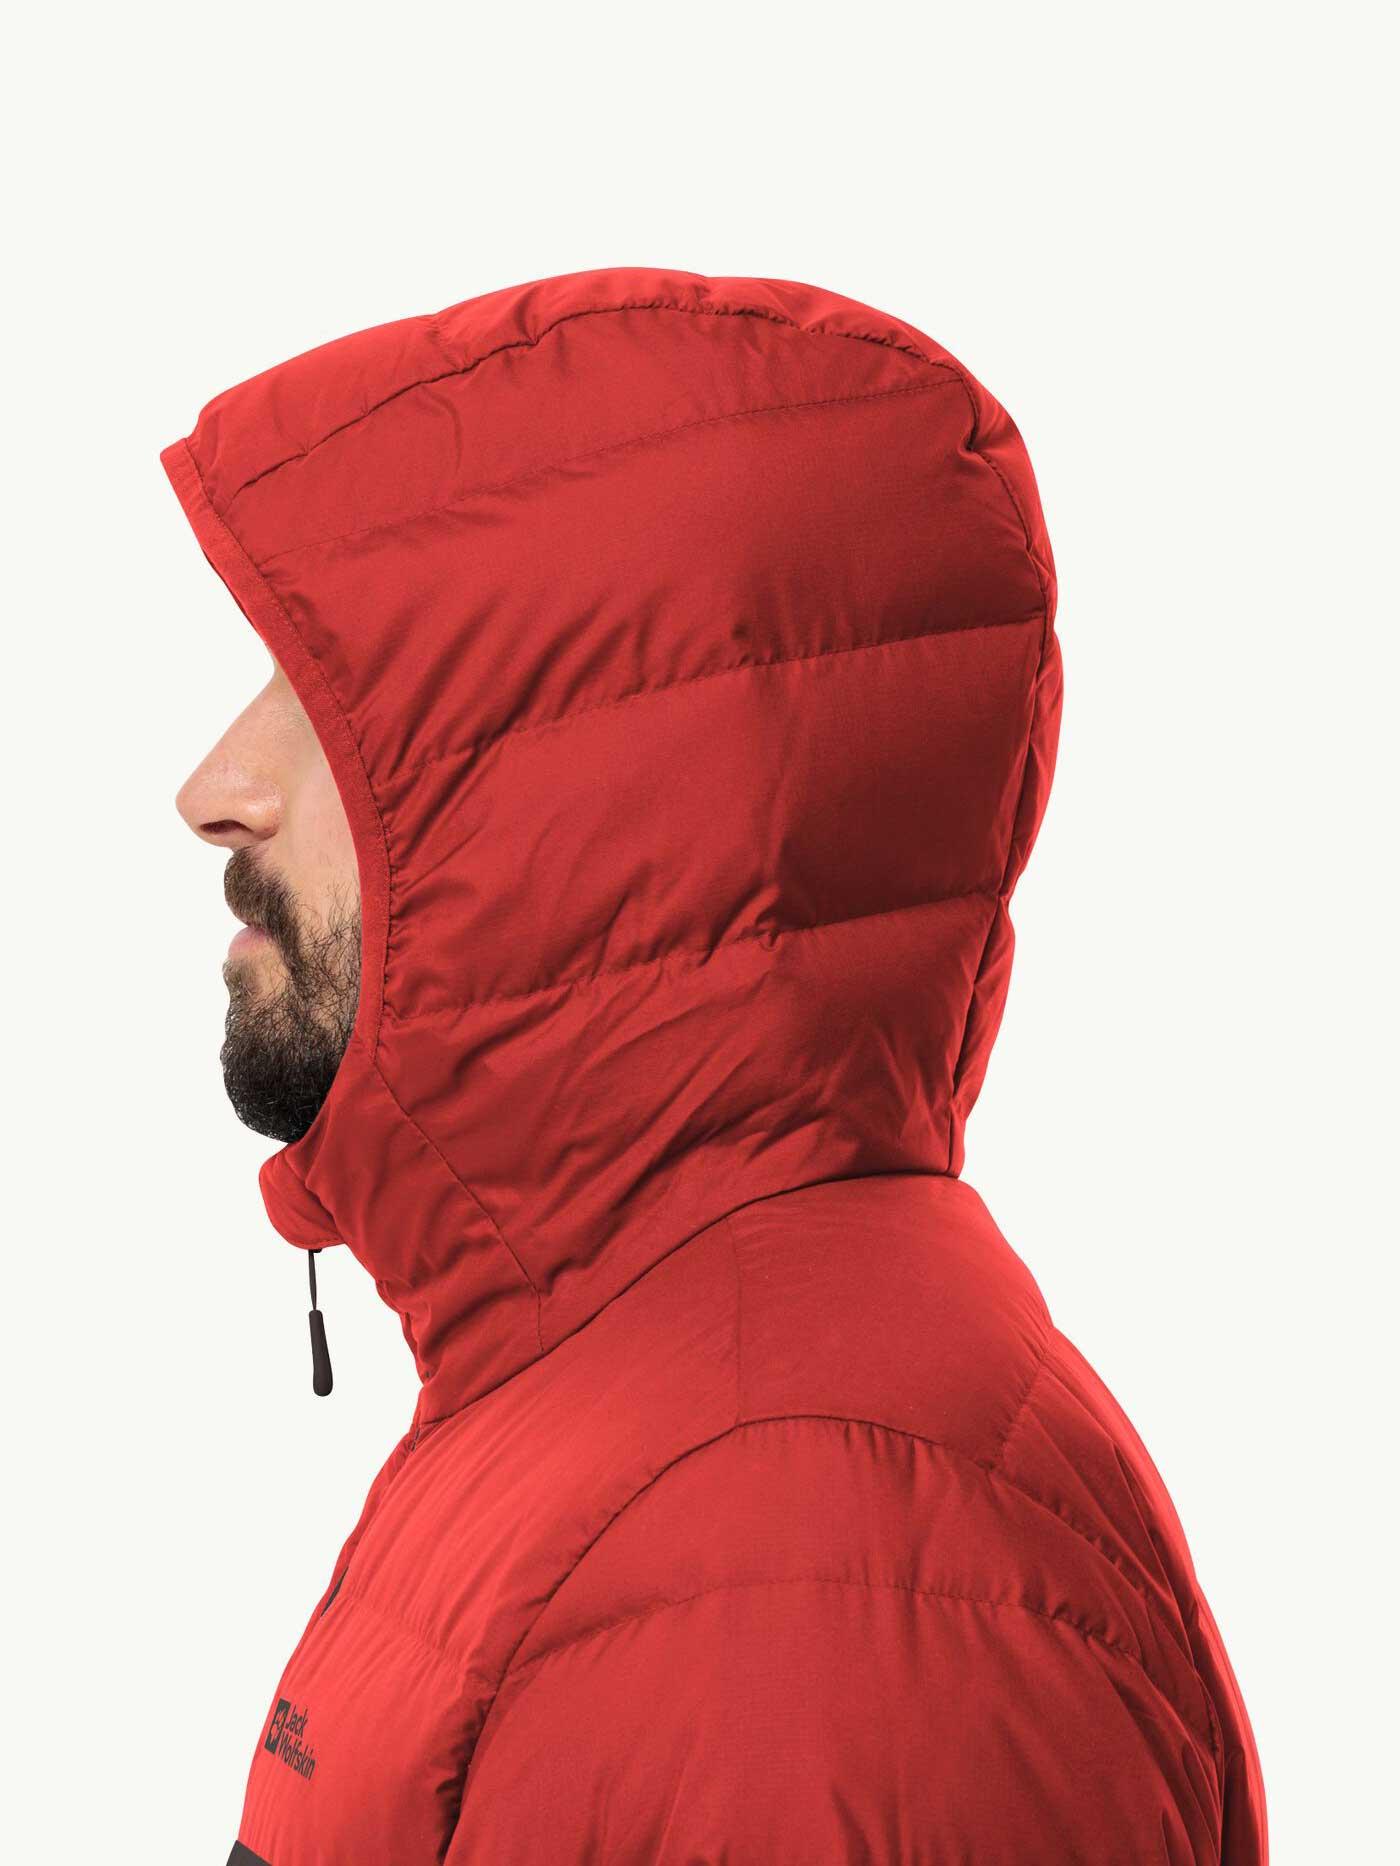 Selected image for JACK WOLFSKIN Muška jakna Ather Down Hoody JW-1207671 crvena